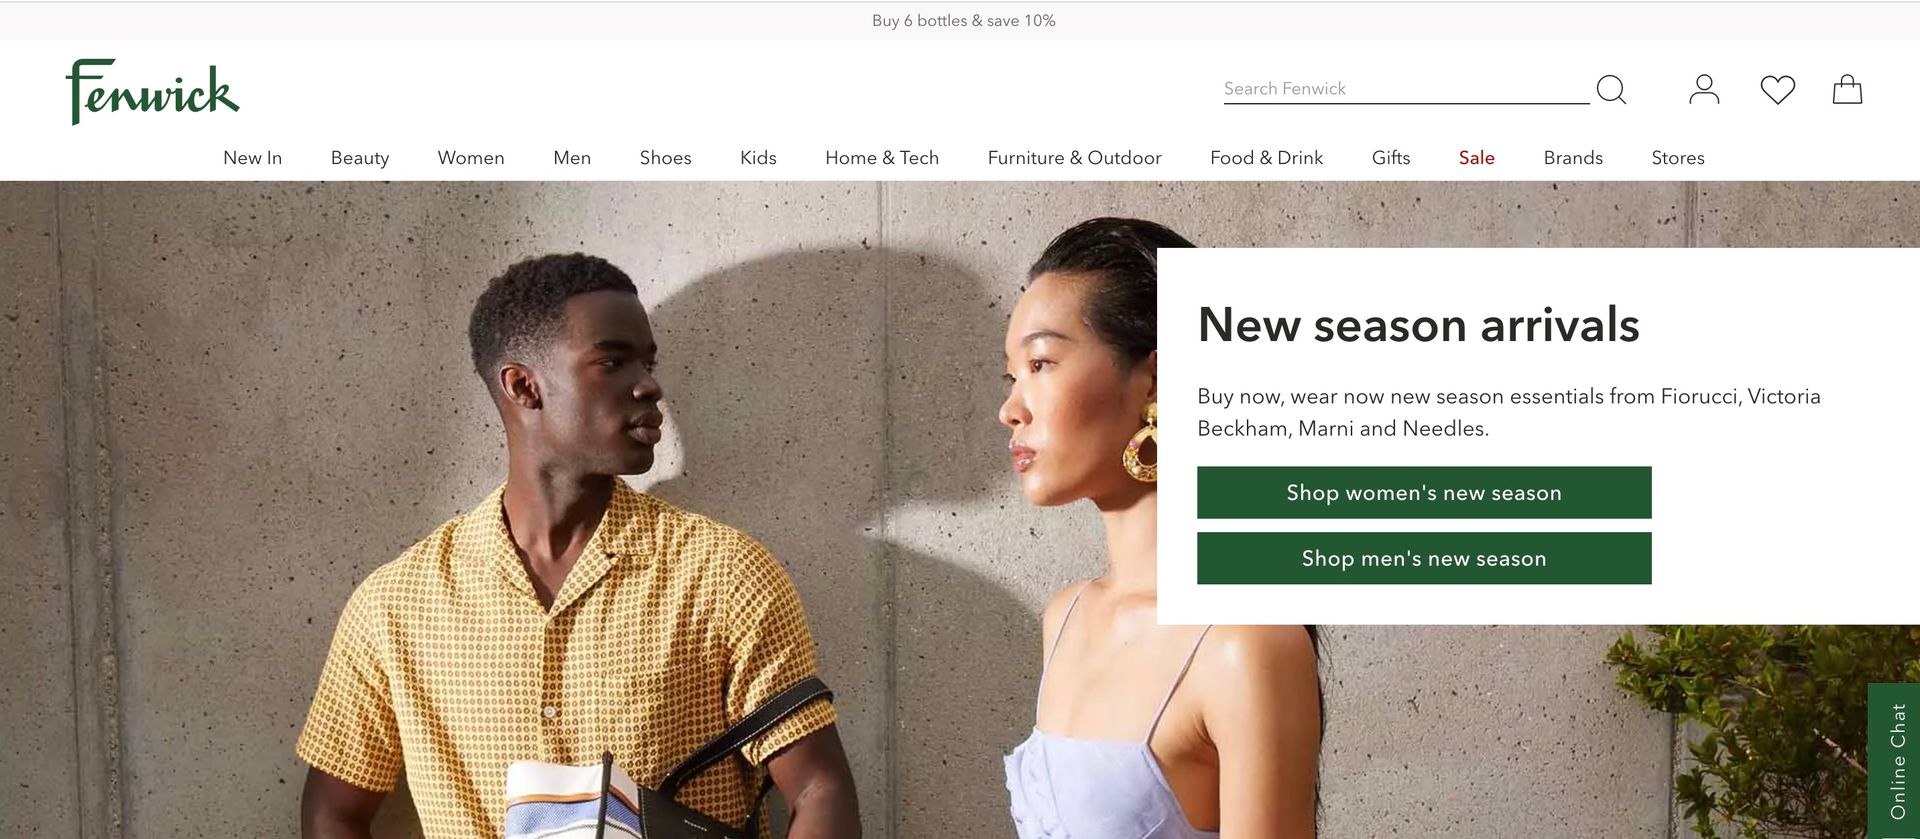 Screenshot of the Fenwick homepage, a black male model wearing a yellow tshirt and an asian woman wearing a light purple top are featured. New season arrivals is prominent copy. The website menu and logo can also be seen.